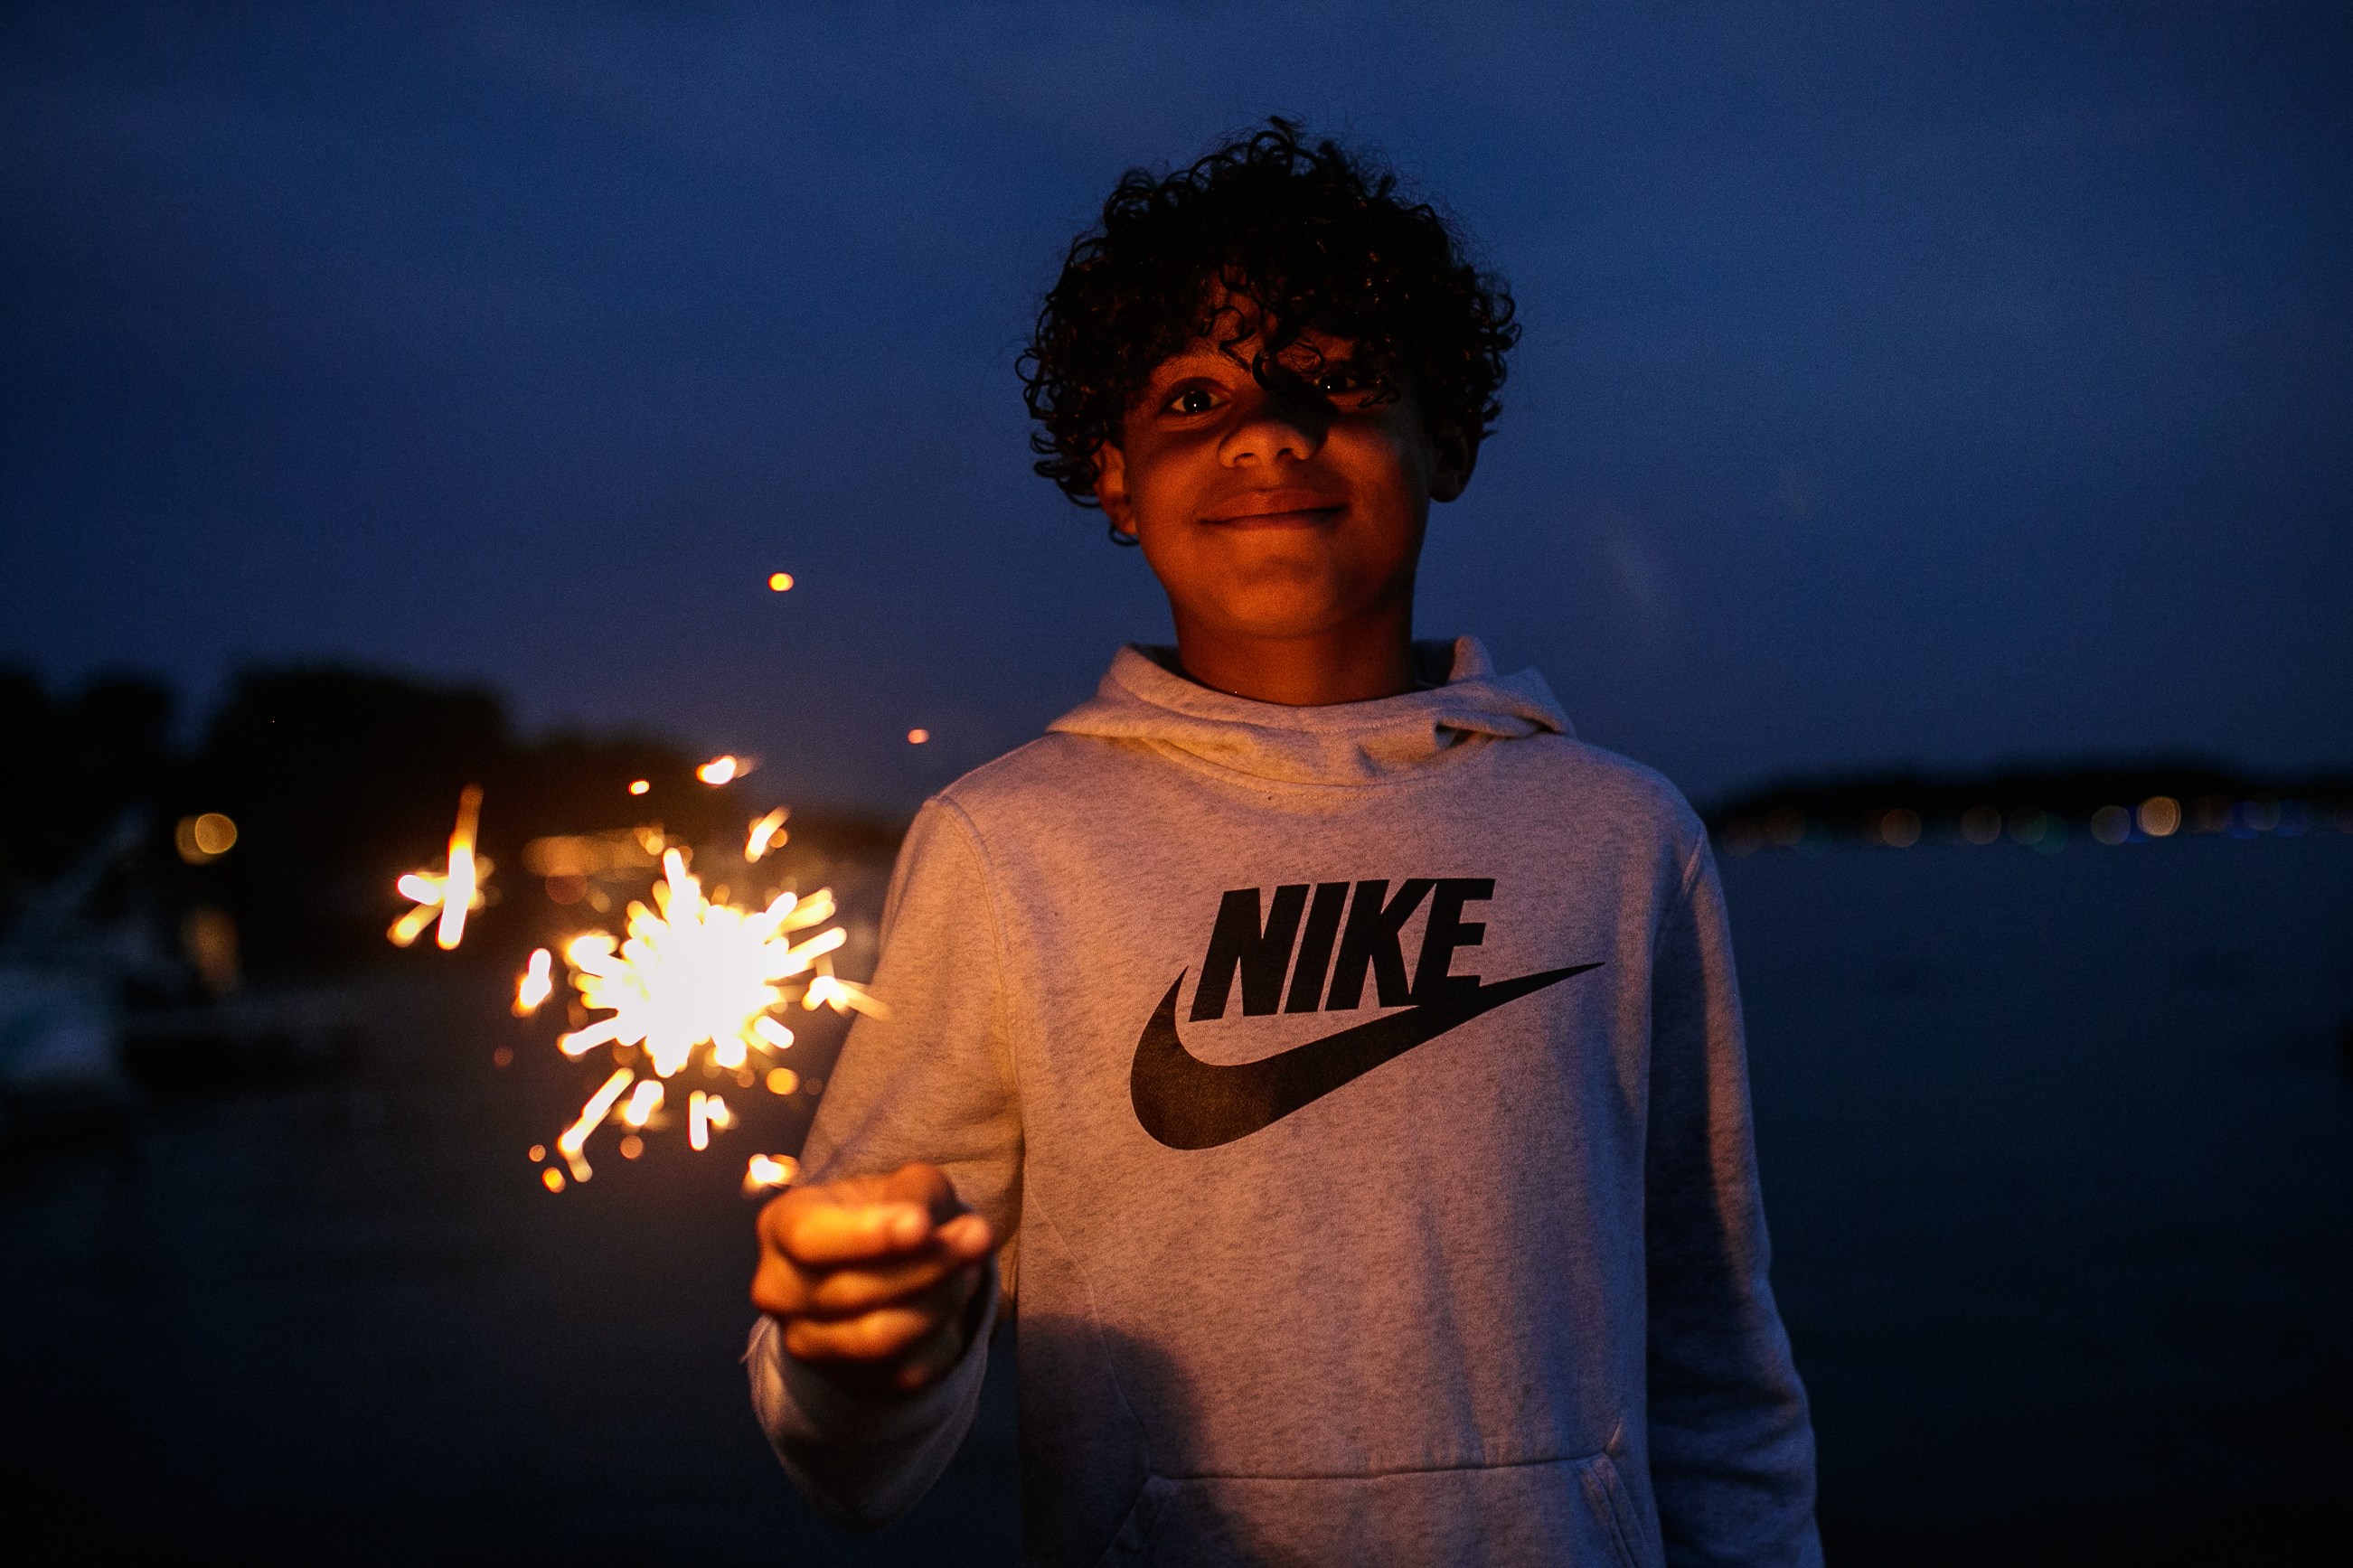 Brodi Jourdan, 10,  plays with a sparkler while waiting for the start of the annual Lake Fenton Fireworks on the water in front of the Township hall on Saturday, June 2, 2022 in Fenton Township. (Jenifer Veloso | MLive.com)


